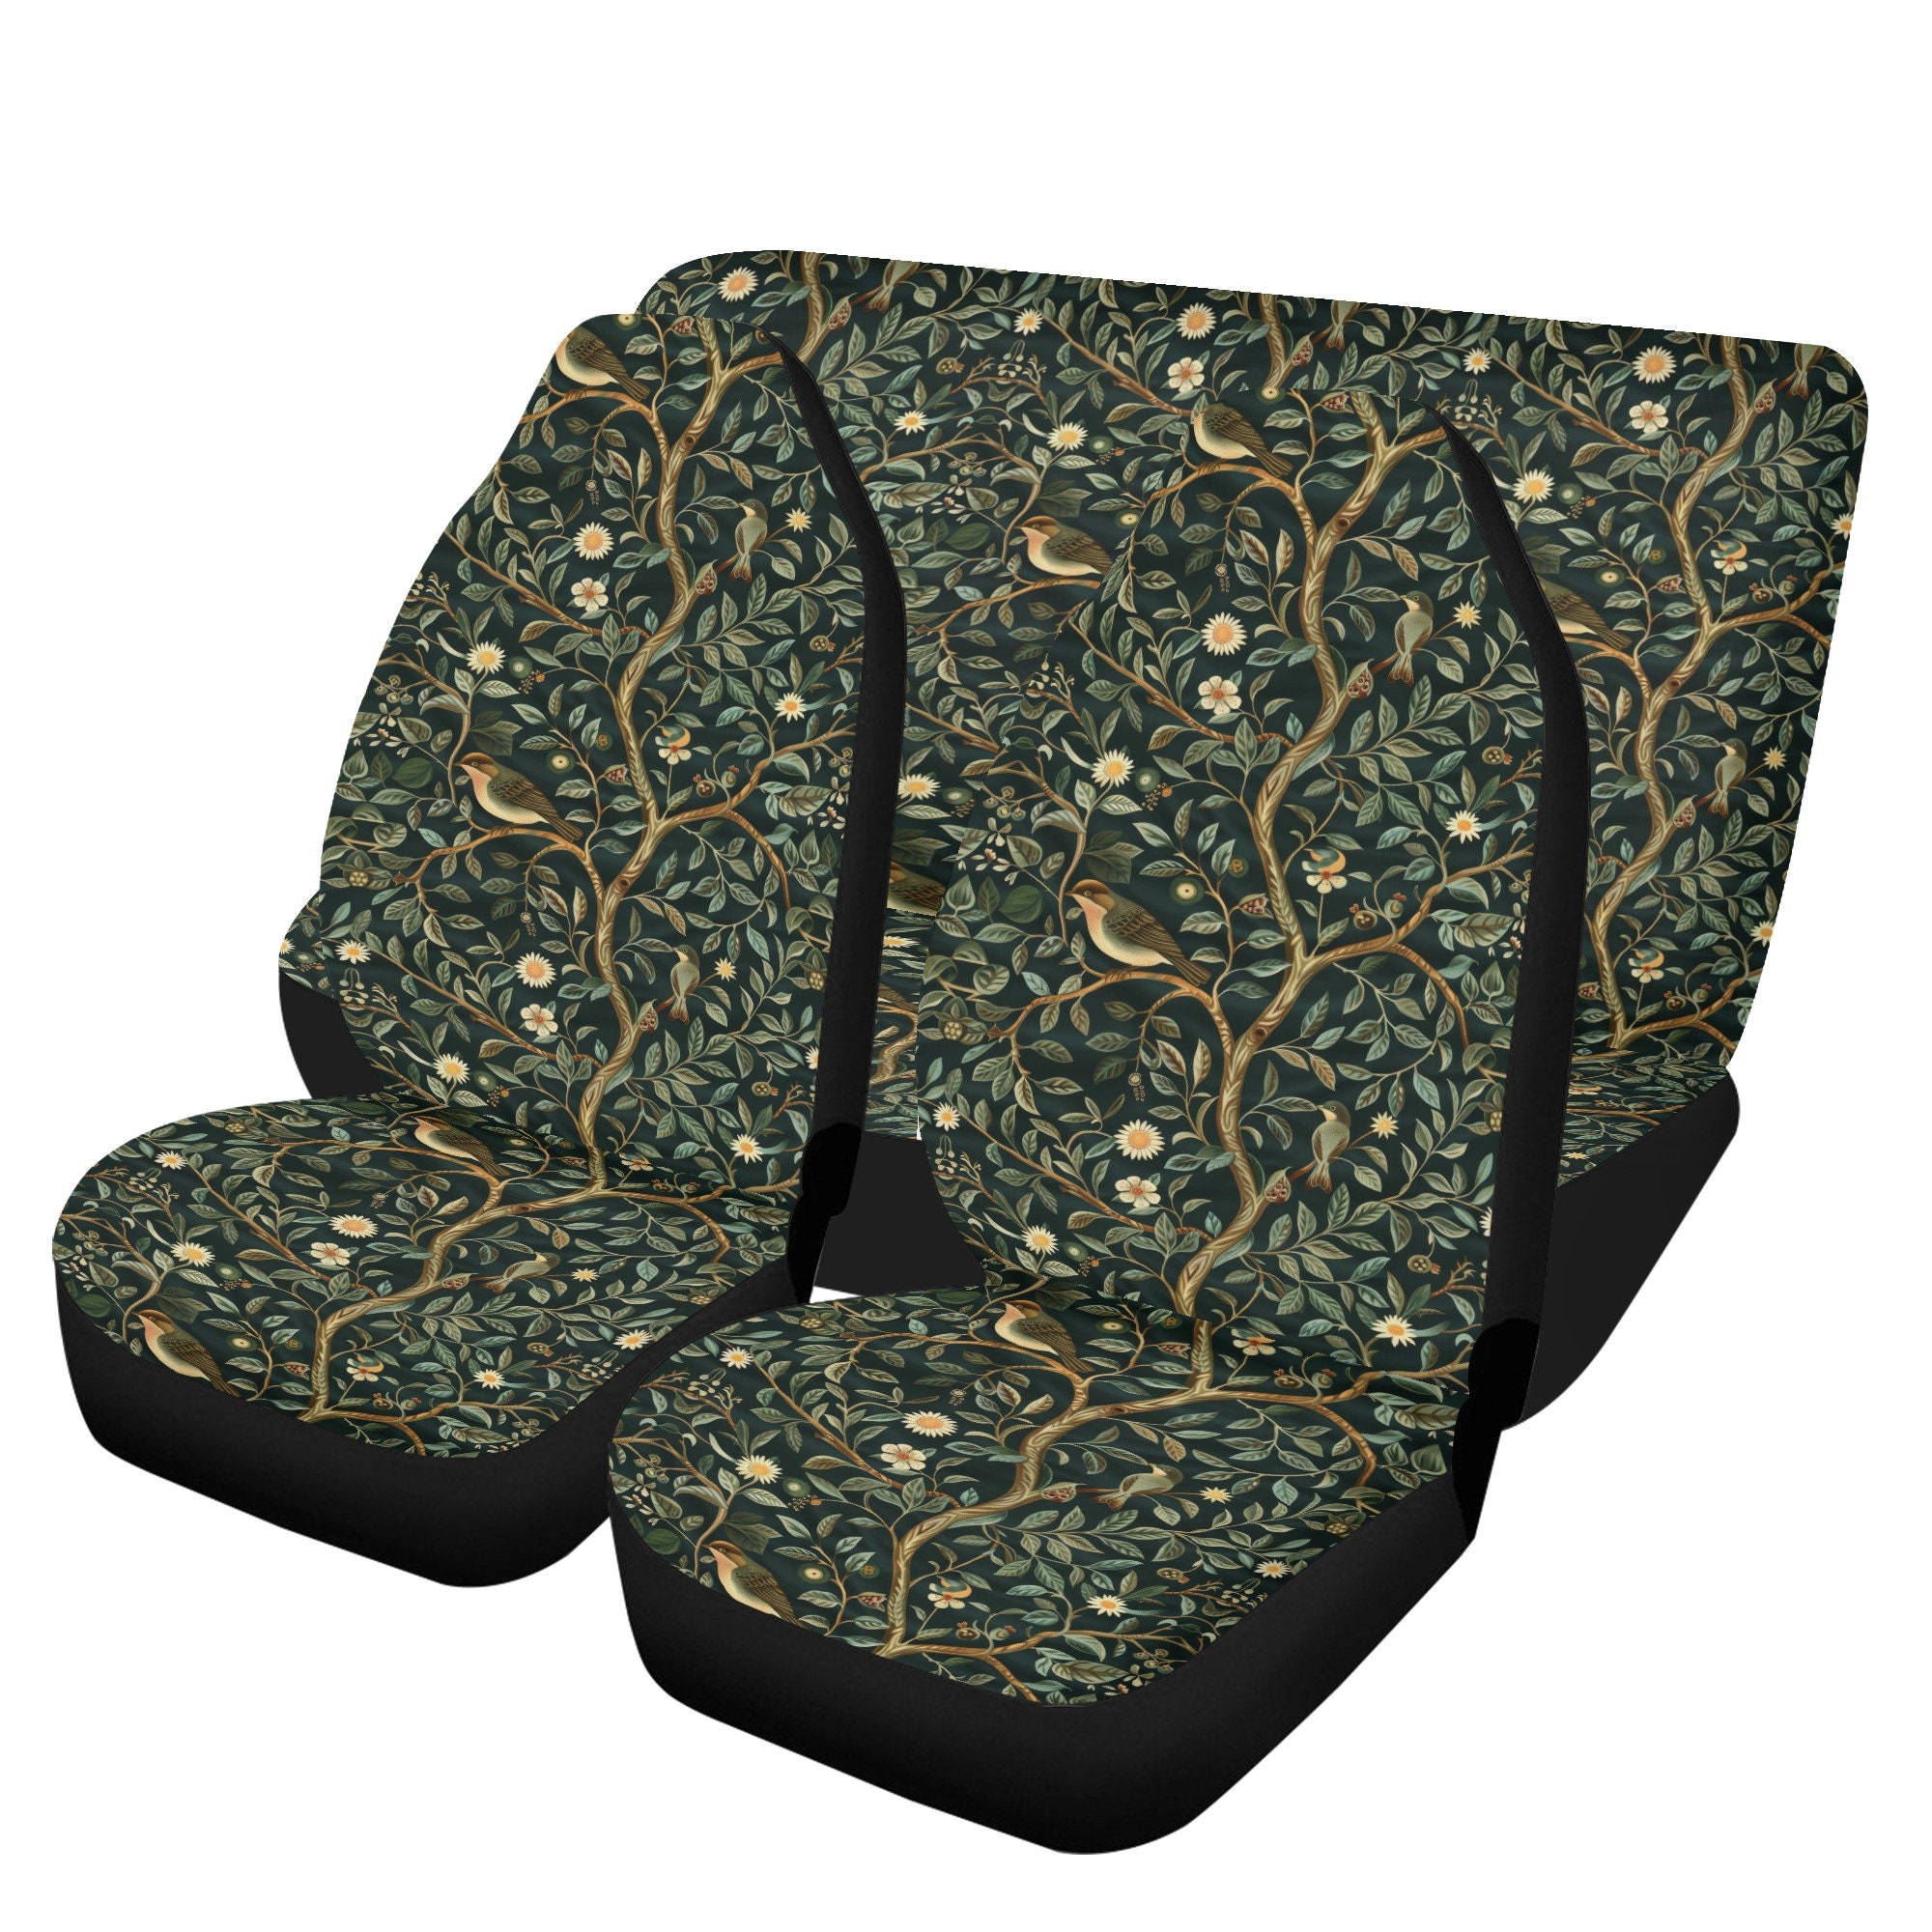 Retro Green Forest Car Seat Cover Full Set, Nature Bird Floral Front And Back Seat Covers For Vehicle,